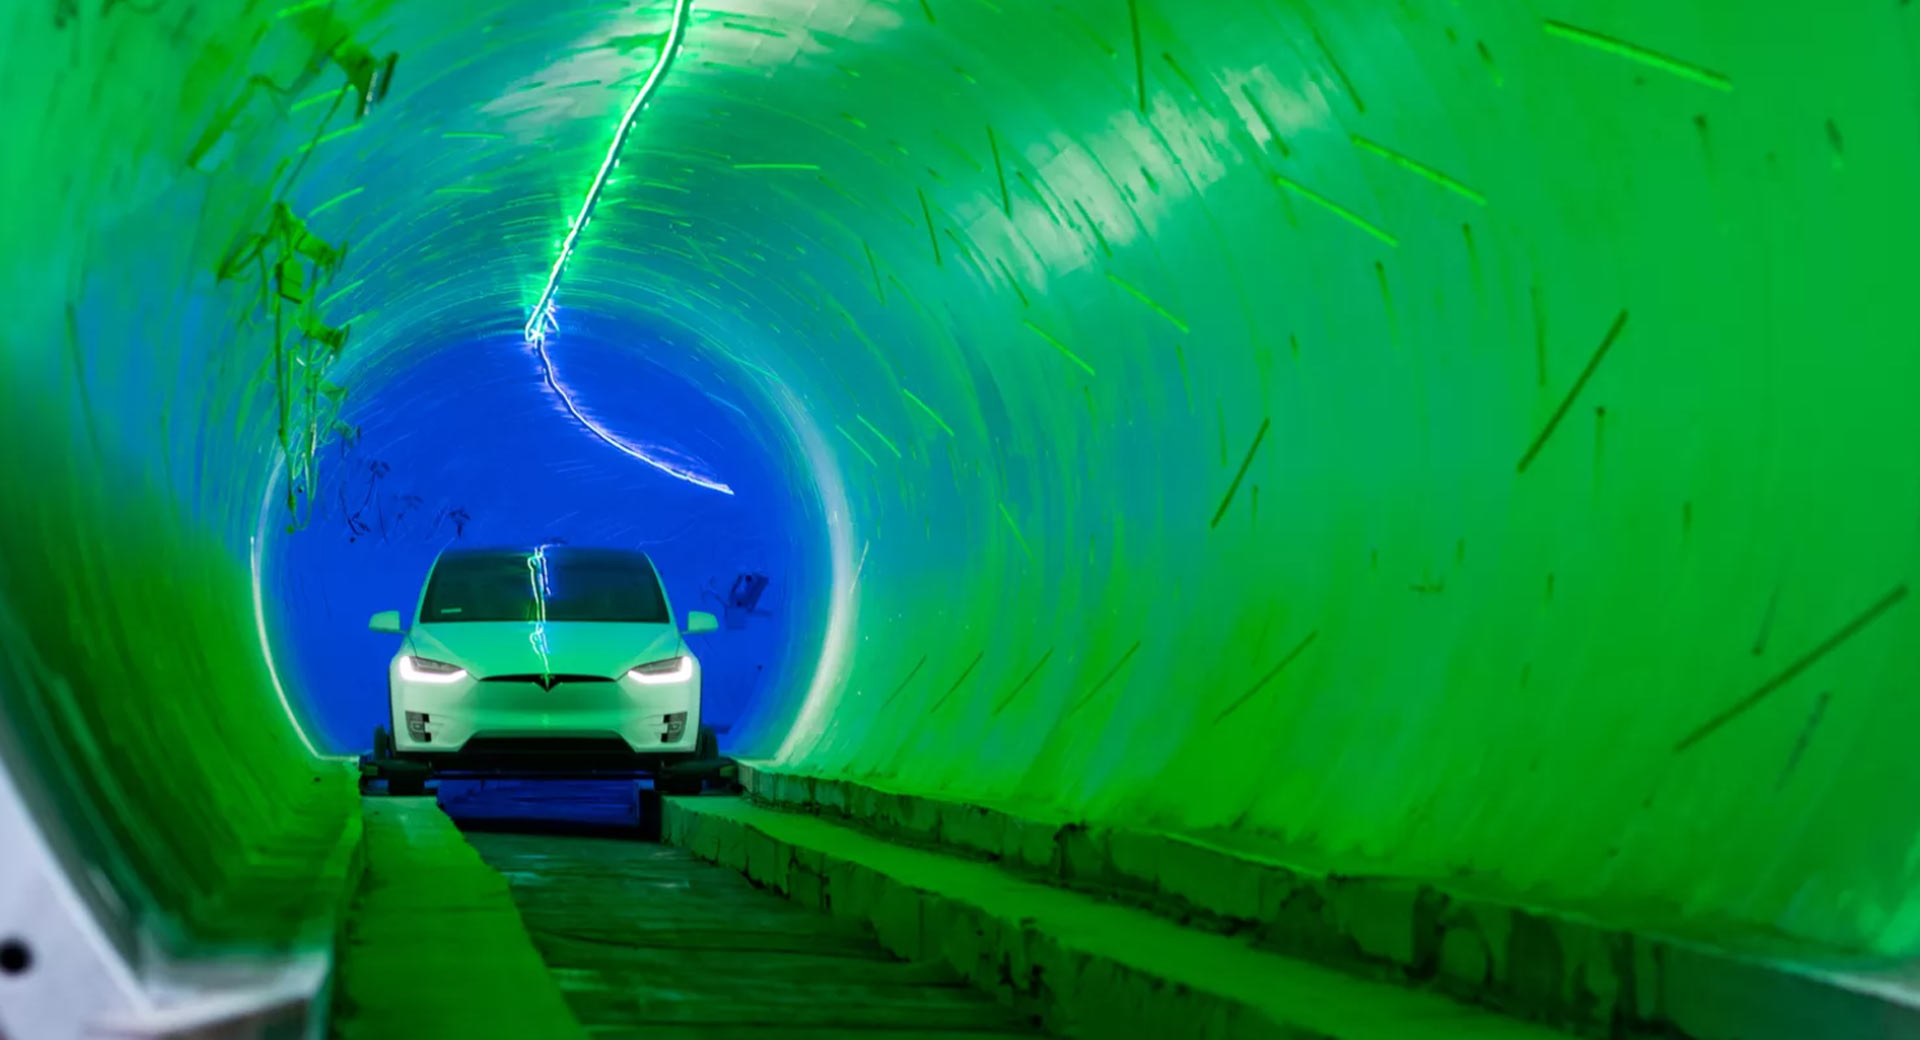 The Boring Company LVCC Loop timelapse shows smooth, busy tunnel activity